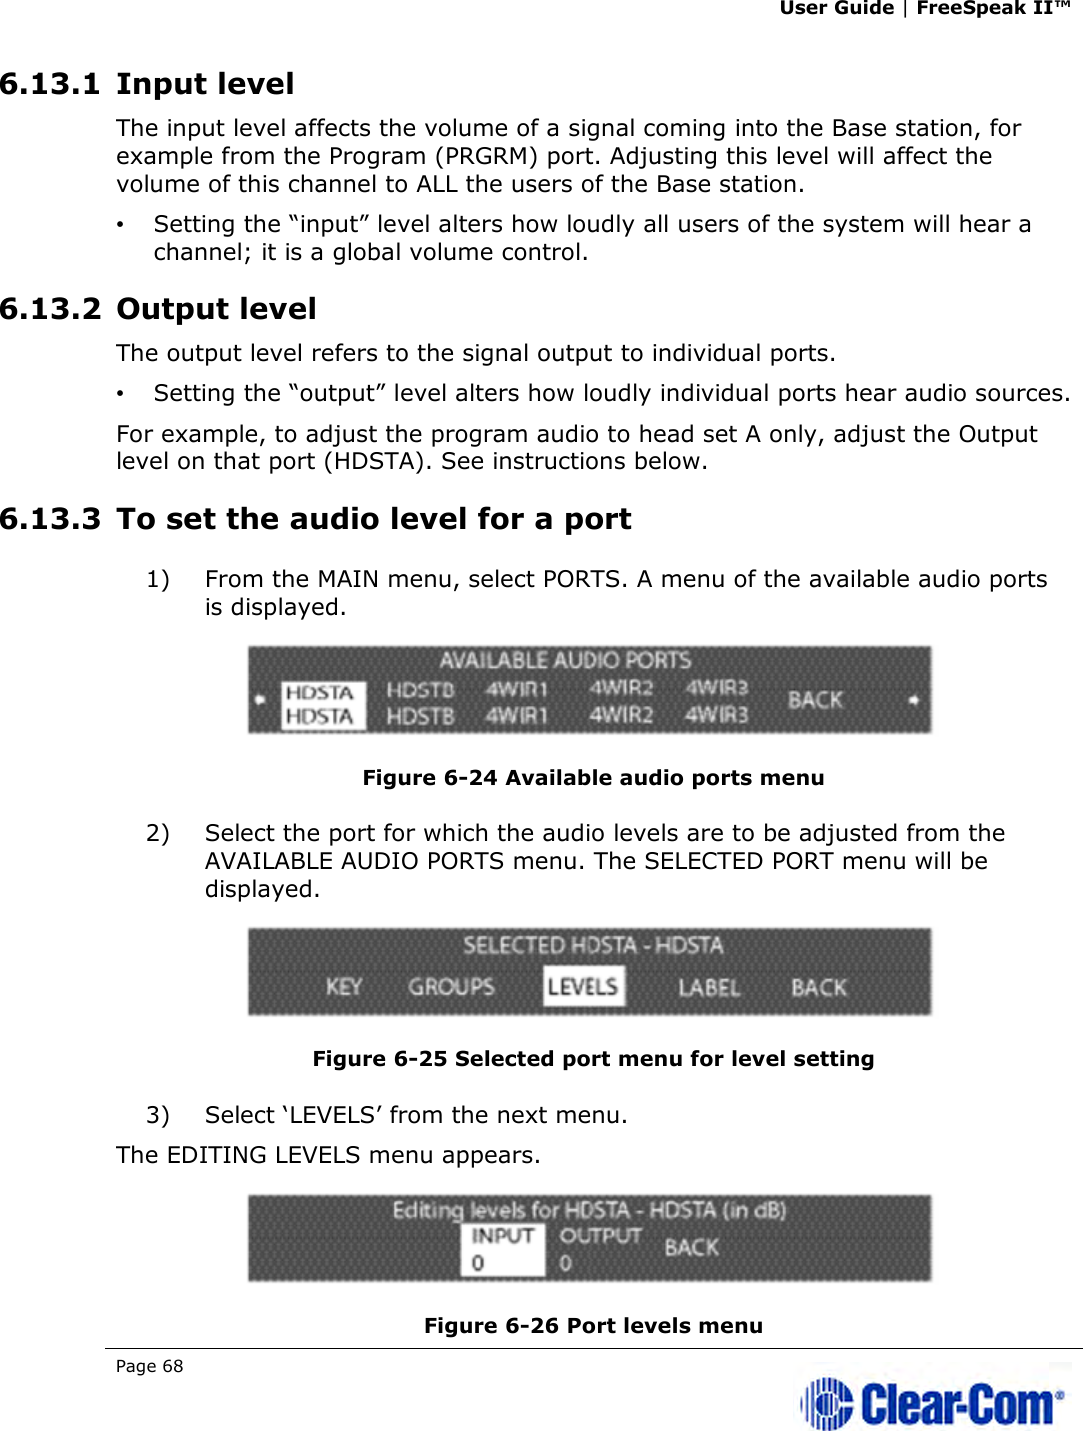 User Guide | FreeSpeak II™  Page 68   6.13.1 Input level The input level affects the volume of a signal coming into the Base station, for example from the Program (PRGRM) port. Adjusting this level will affect the volume of this channel to ALL the users of the Base station.  •   Setting the “input” level alters how loudly all users of the system will hear a channel; it is a global volume control. 6.13.2 Output level The output level refers to the signal output to individual ports.   •   Setting the “output” level alters how loudly individual ports hear audio sources. For example, to adjust the program audio to head set A only, adjust the Output level on that port (HDSTA). See instructions below.  6.13.3 To set the audio level for a port 1) From the MAIN menu, select PORTS. A menu of the available audio ports is displayed.  Figure 6-24 Available audio ports menu 2) Select the port for which the audio levels are to be adjusted from the AVAILABLE AUDIO PORTS menu. The SELECTED PORT menu will be displayed.  Figure 6-25 Selected port menu for level setting 3) Select ‘LEVELS’ from the next menu. The EDITING LEVELS menu appears.   Figure 6-26 Port levels menu 